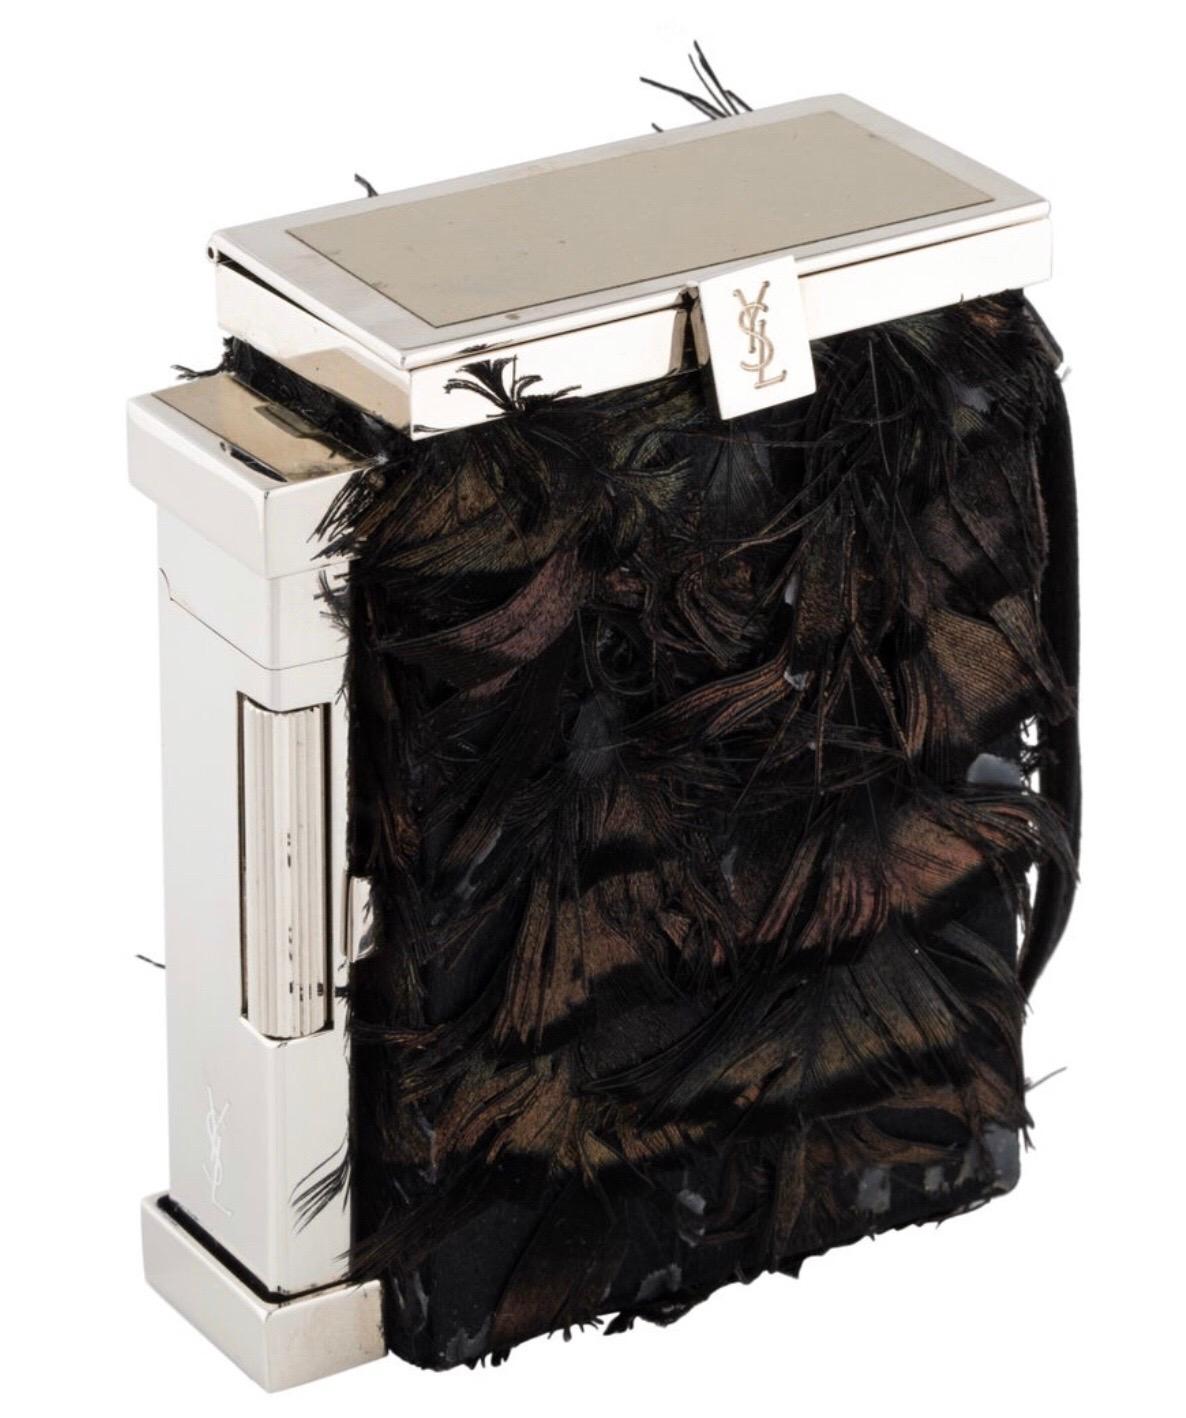 Yves Saint Laurent by Tom Ford feathered case with lighter. Condition: Good, some feather loss, needs butane. Includes dust bag and box.